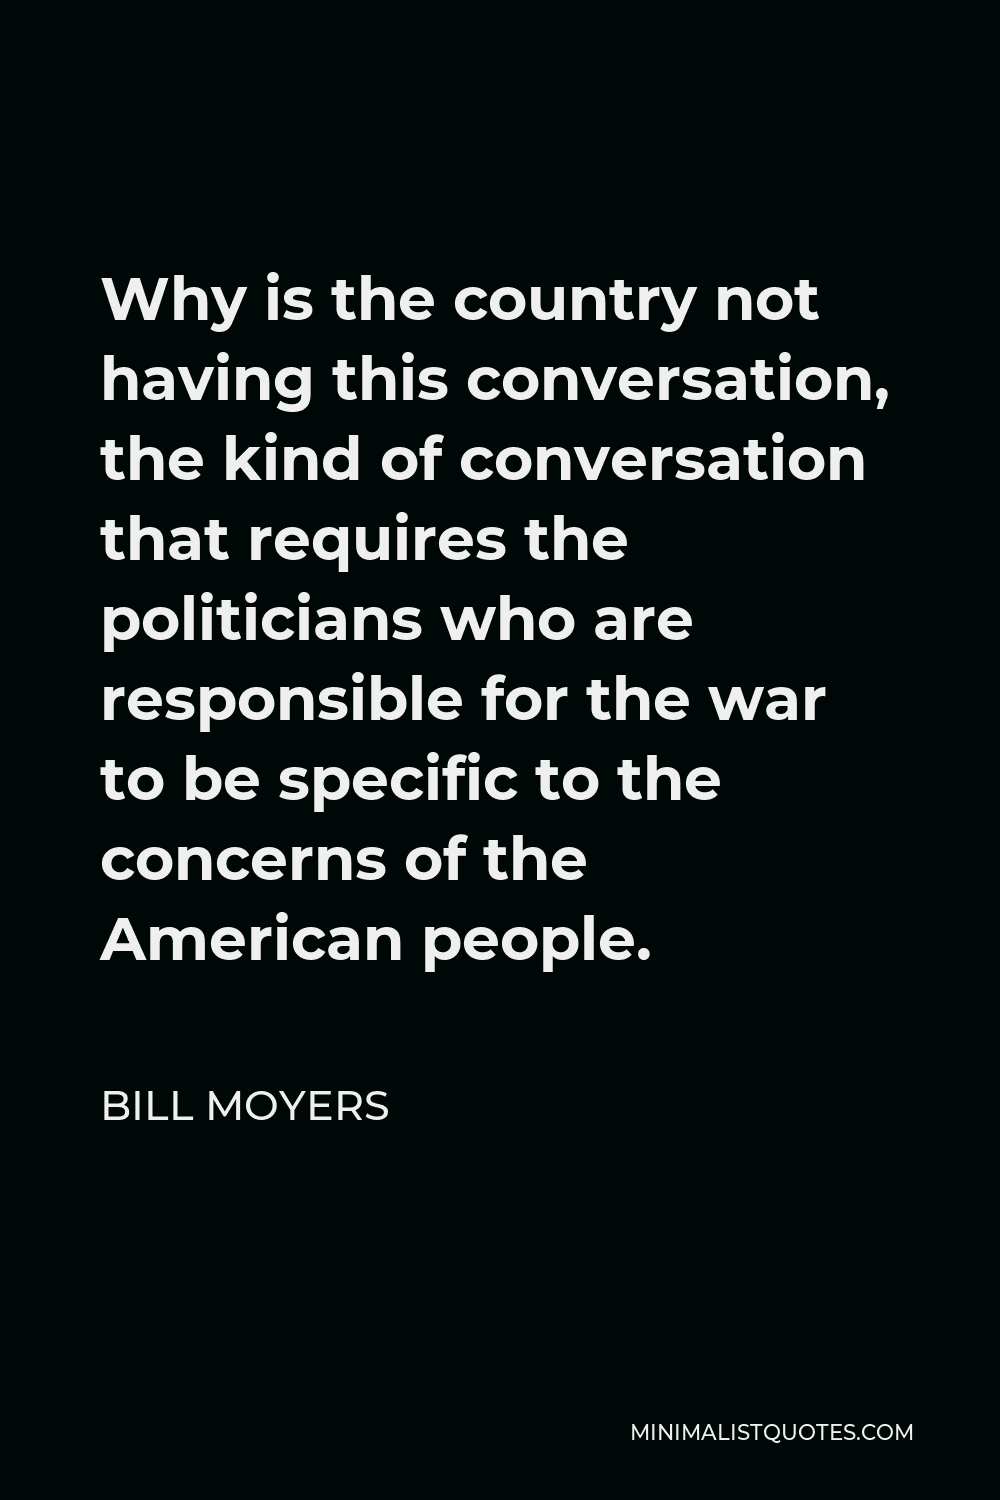 Bill Moyers Quote - Why is the country not having this conversation, the kind of conversation that requires the politicians who are responsible for the war to be specific to the concerns of the American people.